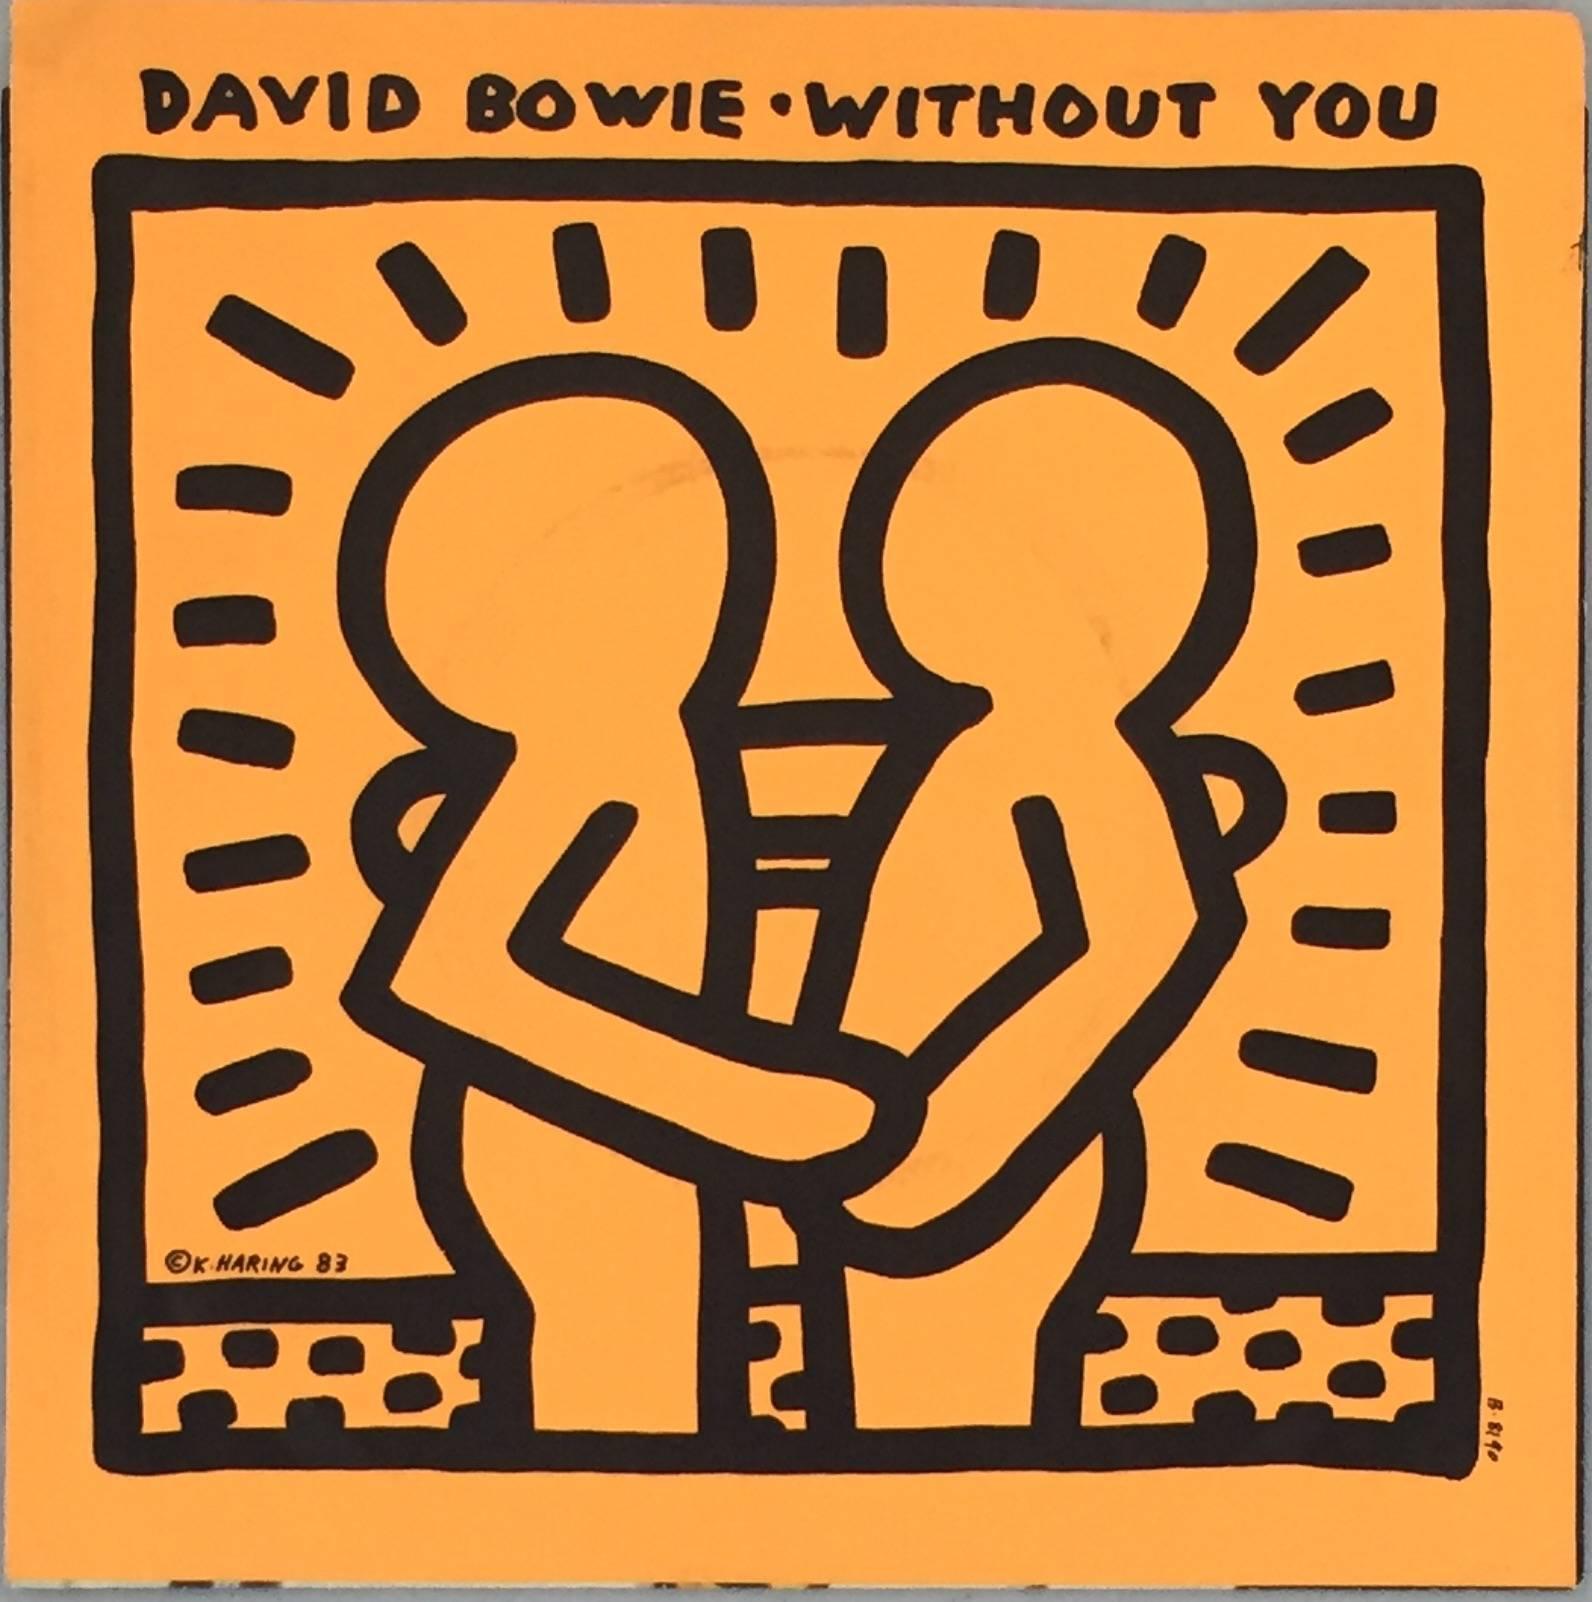 David BOWIE "Without You" A Rare Highly Sought After Vinyl Art Cover featuring Original Artwork by Keith Haring

Year: 1983

Medium: Off-Set Lithograph

Dimensions: 7 x 7 inches

Cover: Some minor shelf wear; otherwise good condition for its